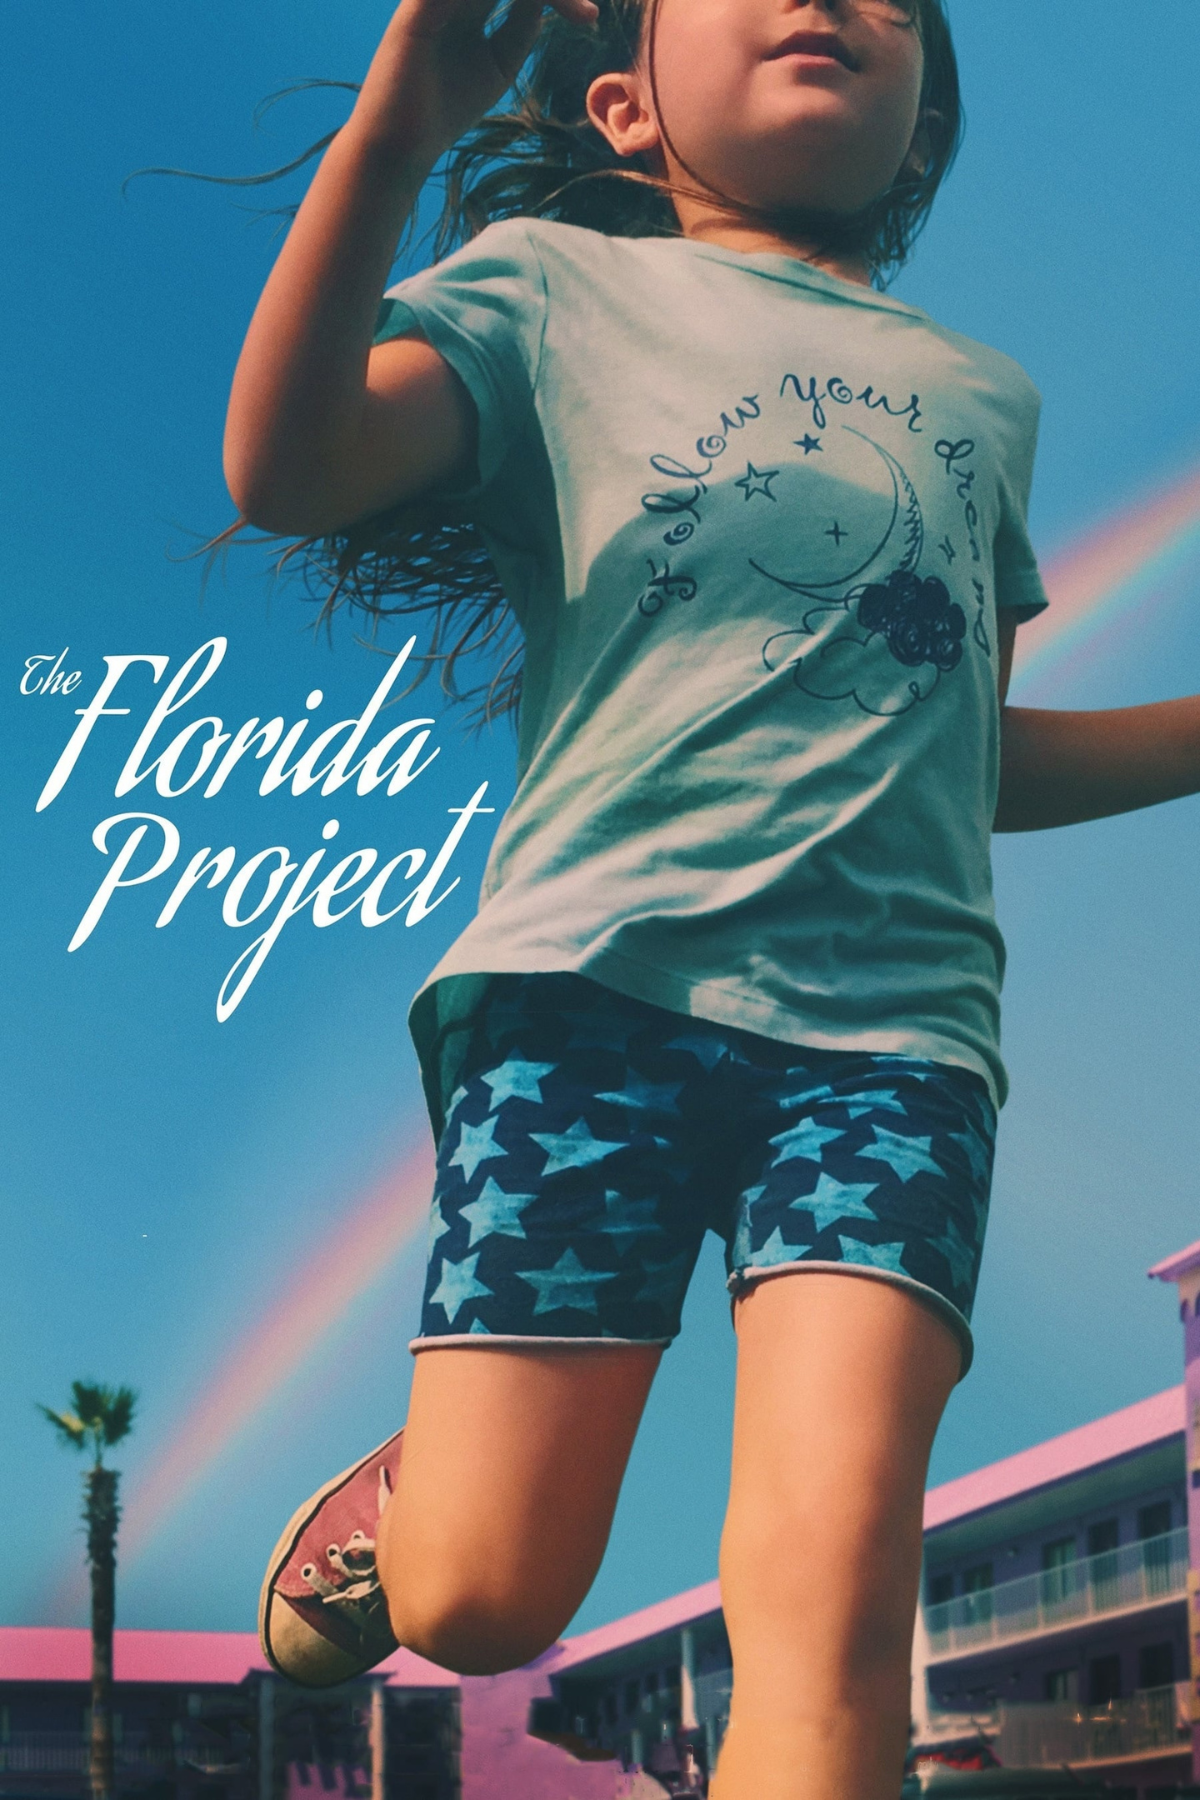 the florida project movie 2017 a24 film sean baker